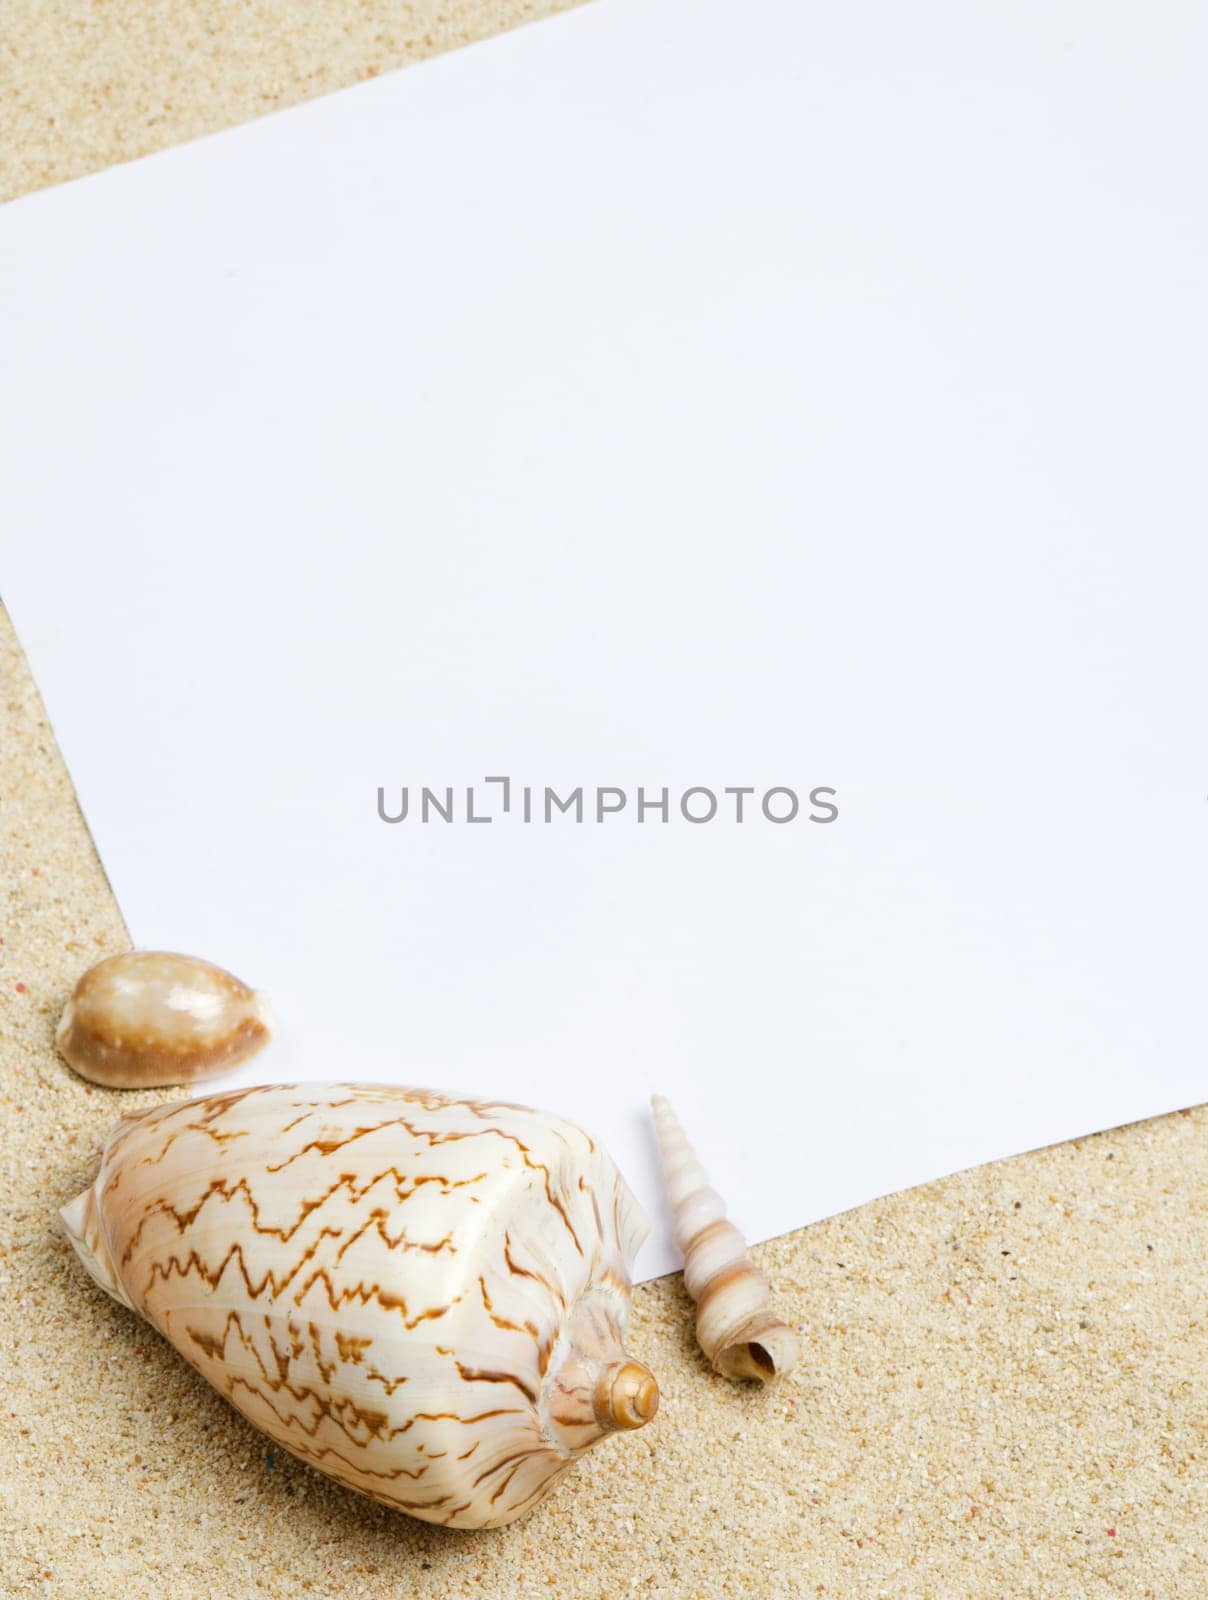 Blank paper on sand by homydesign